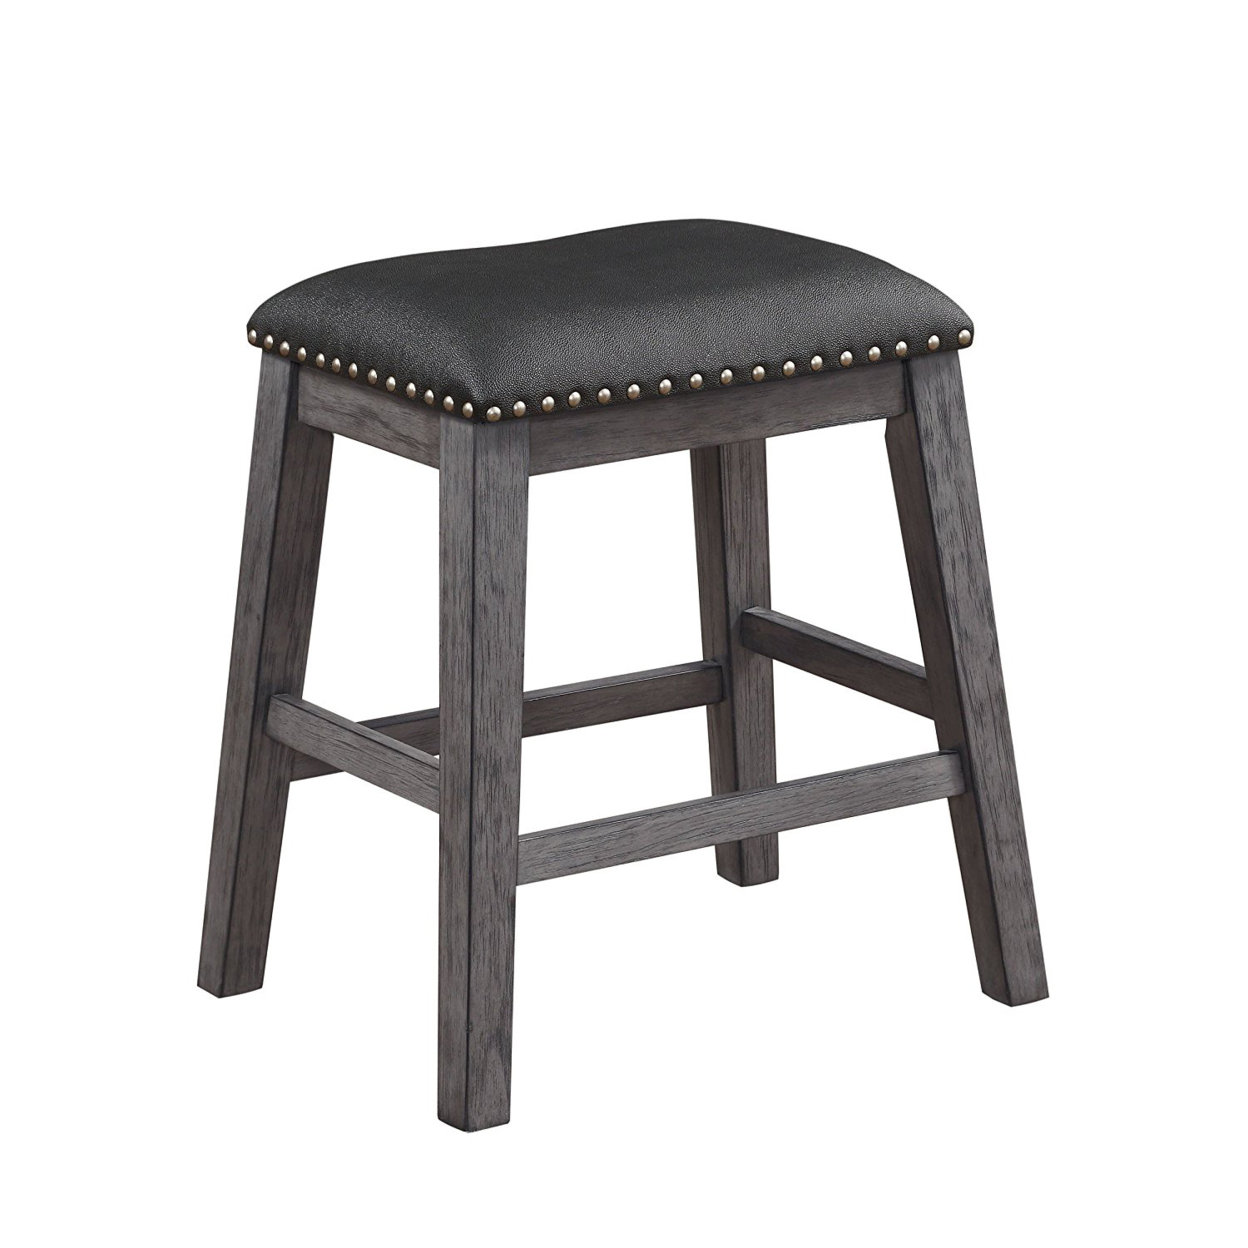 Wood & Leather CoUnter Height Stool With Nail Head Trim, Set Of 2, Black & Gray- Saltoro Sherpi